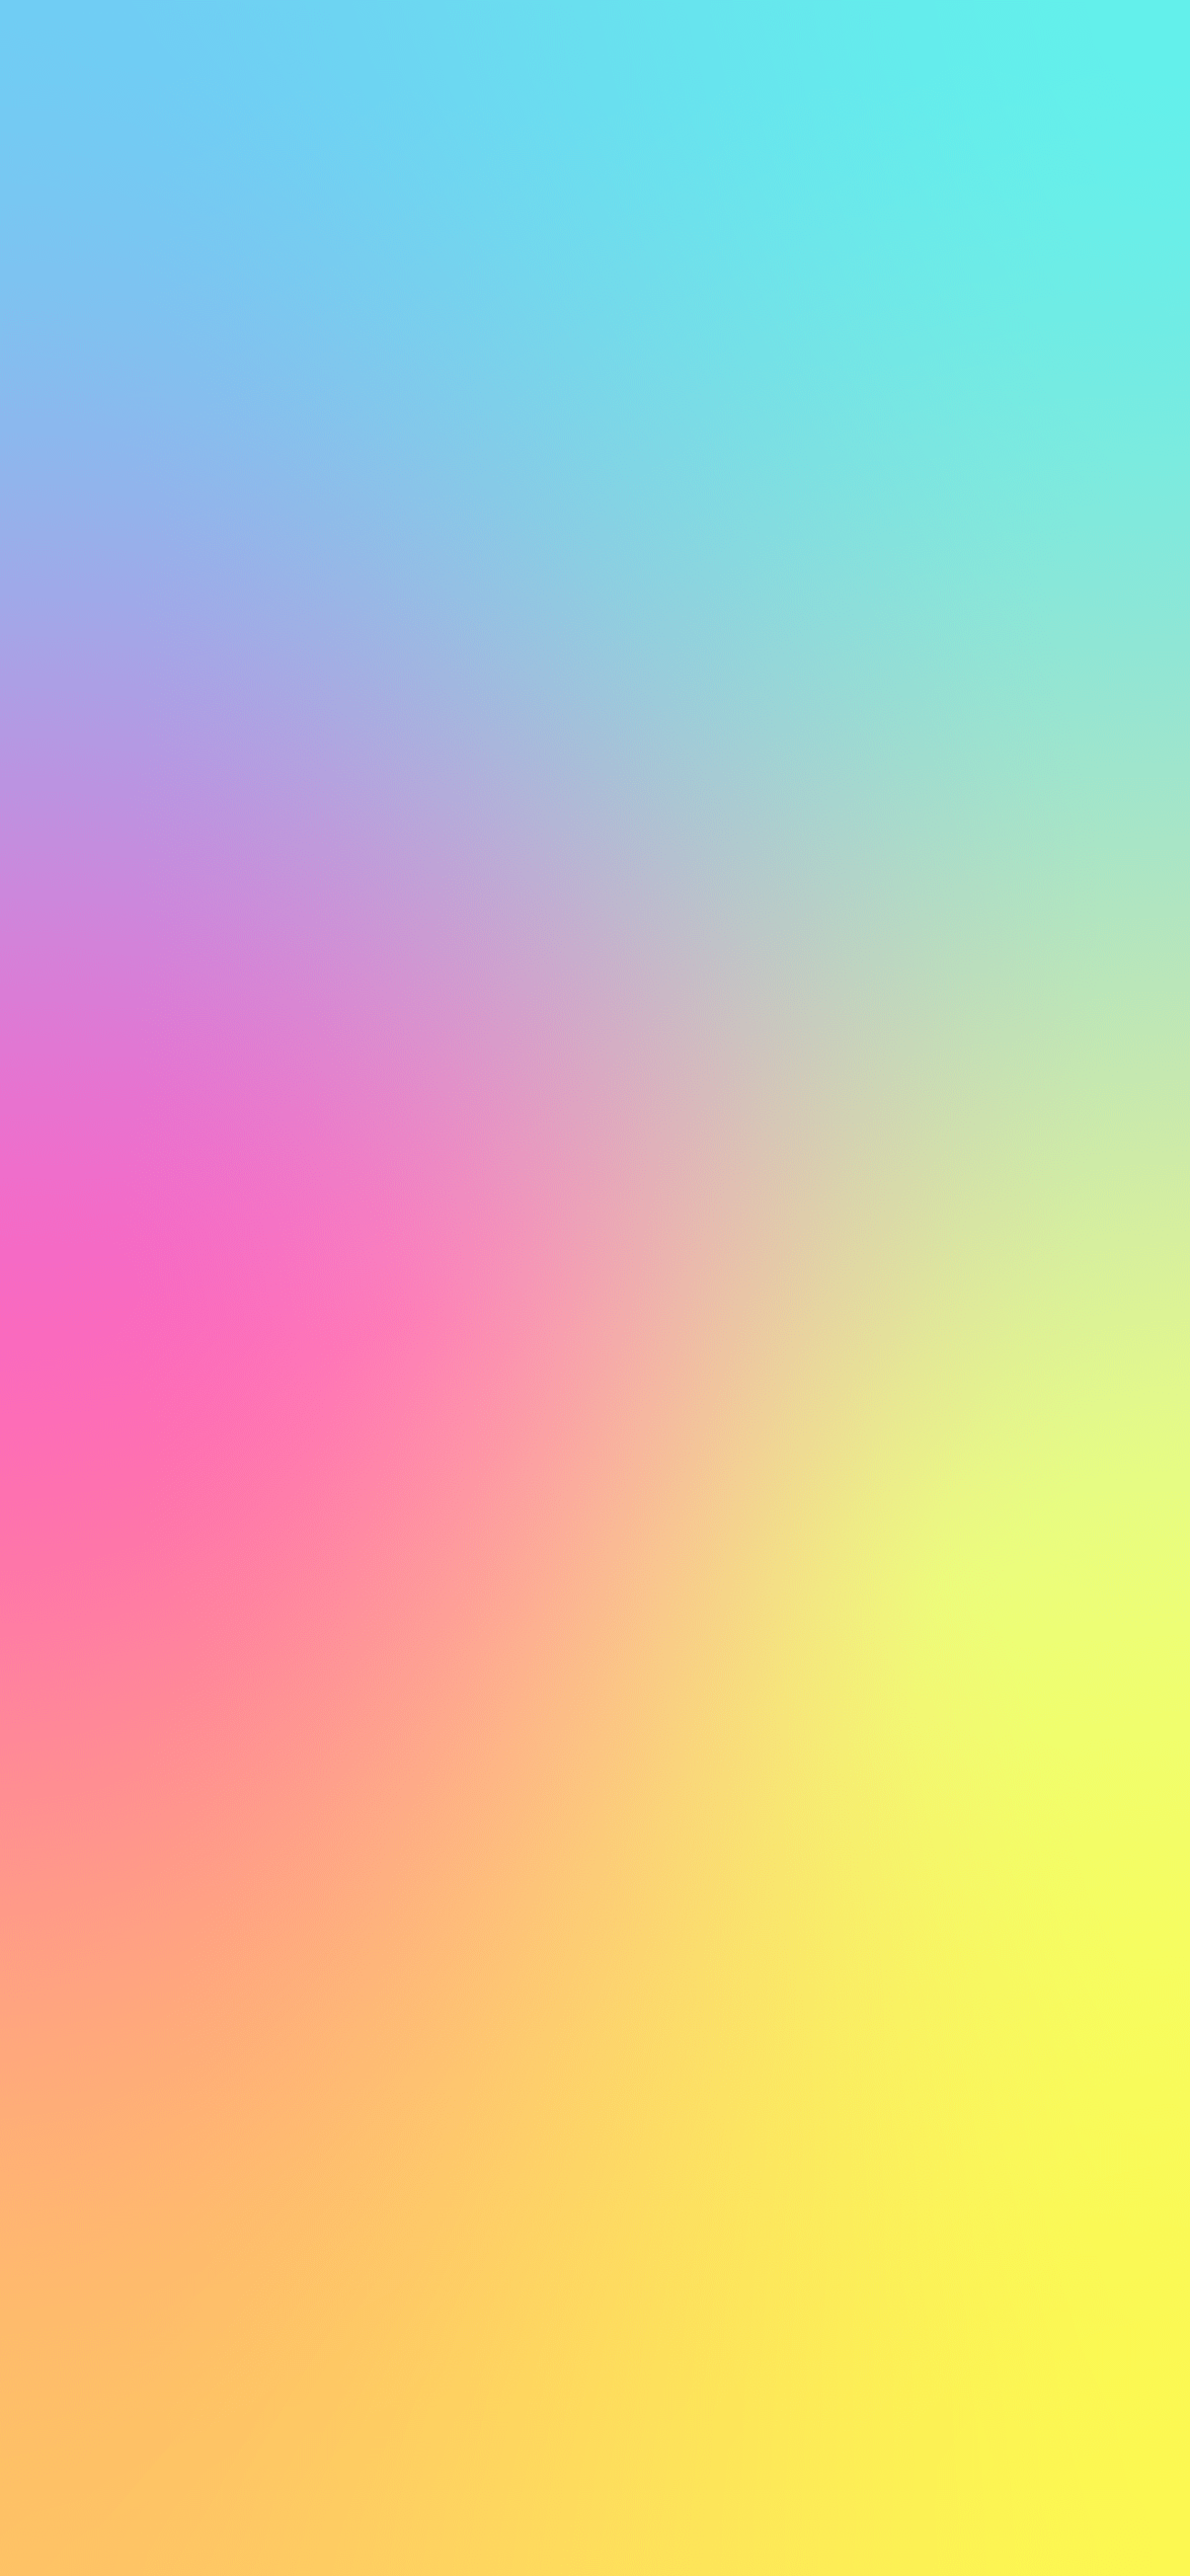 A colorful background with some blurred colors - Pastel rainbow